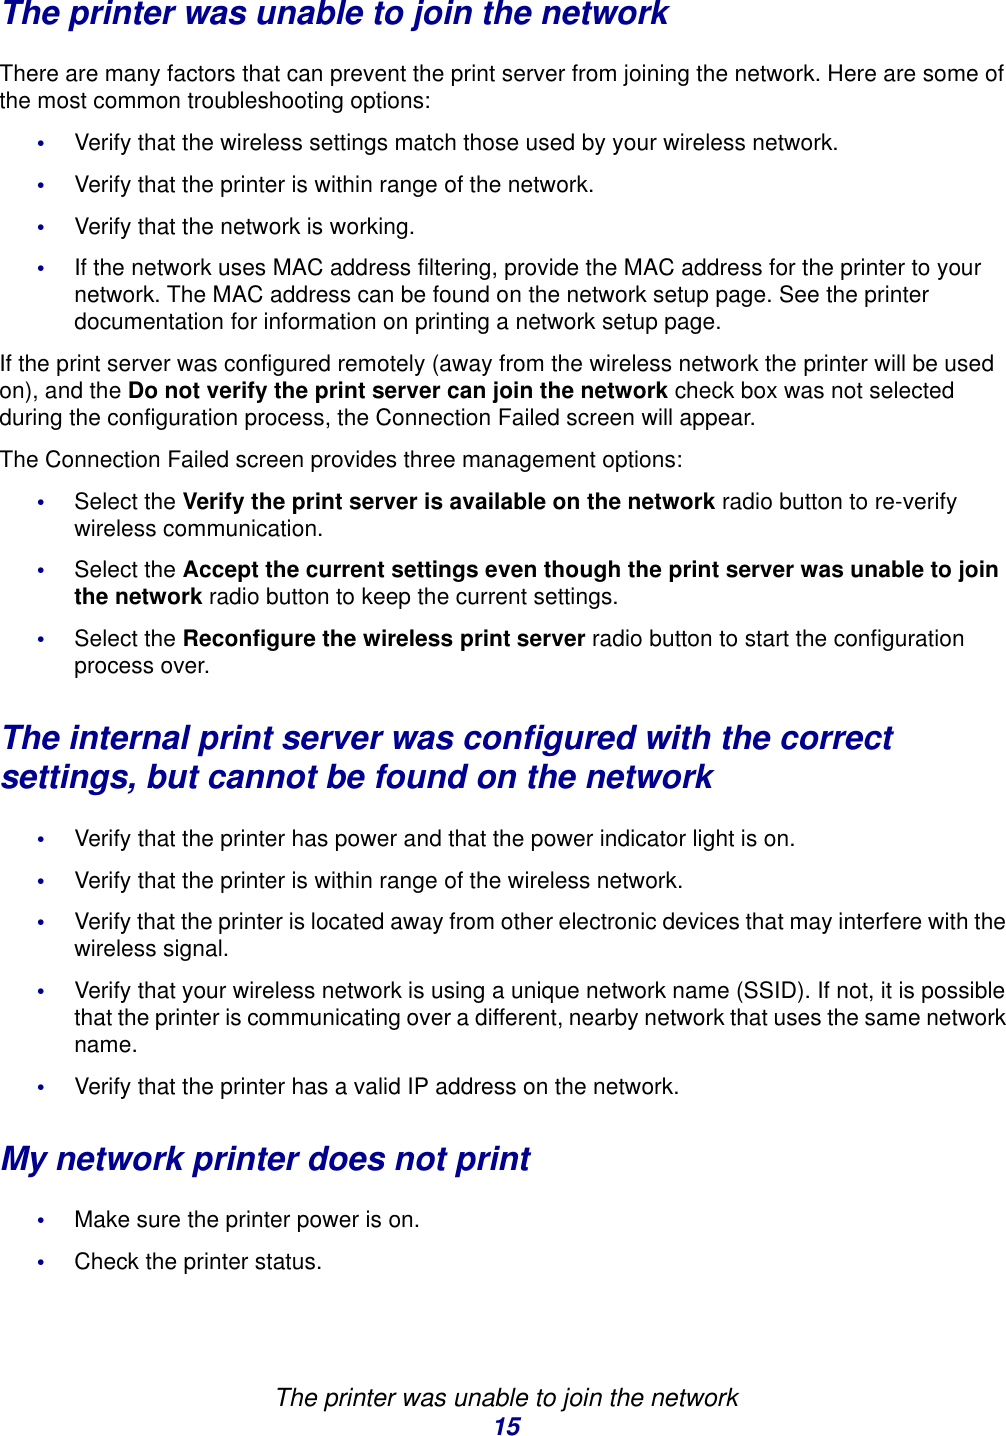 The printer was unable to join the network15The printer was unable to join the networkThere are many factors that can prevent the print server from joining the network. Here are some of the most common troubleshooting options: •Verify that the wireless settings match those used by your wireless network. •Verify that the printer is within range of the network.•Verify that the network is working. •If the network uses MAC address filtering, provide the MAC address for the printer to your network. The MAC address can be found on the network setup page. See the printer documentation for information on printing a network setup page.If the print server was configured remotely (away from the wireless network the printer will be used on), and the Do not verify the print server can join the network check box was not selected during the configuration process, the Connection Failed screen will appear. The Connection Failed screen provides three management options: •Select the Verify the print server is available on the network radio button to re-verify wireless communication. •Select the Accept the current settings even though the print server was unable to join the network radio button to keep the current settings.•Select the Reconfigure the wireless print server radio button to start the configuration process over. The internal print server was configured with the correctsettings, but cannot be found on the network•Verify that the printer has power and that the power indicator light is on.•Verify that the printer is within range of the wireless network.•Verify that the printer is located away from other electronic devices that may interfere with the wireless signal. •Verify that your wireless network is using a unique network name (SSID). If not, it is possible that the printer is communicating over a different, nearby network that uses the same network name.•Verify that the printer has a valid IP address on the network. My network printer does not print•Make sure the printer power is on.•Check the printer status.